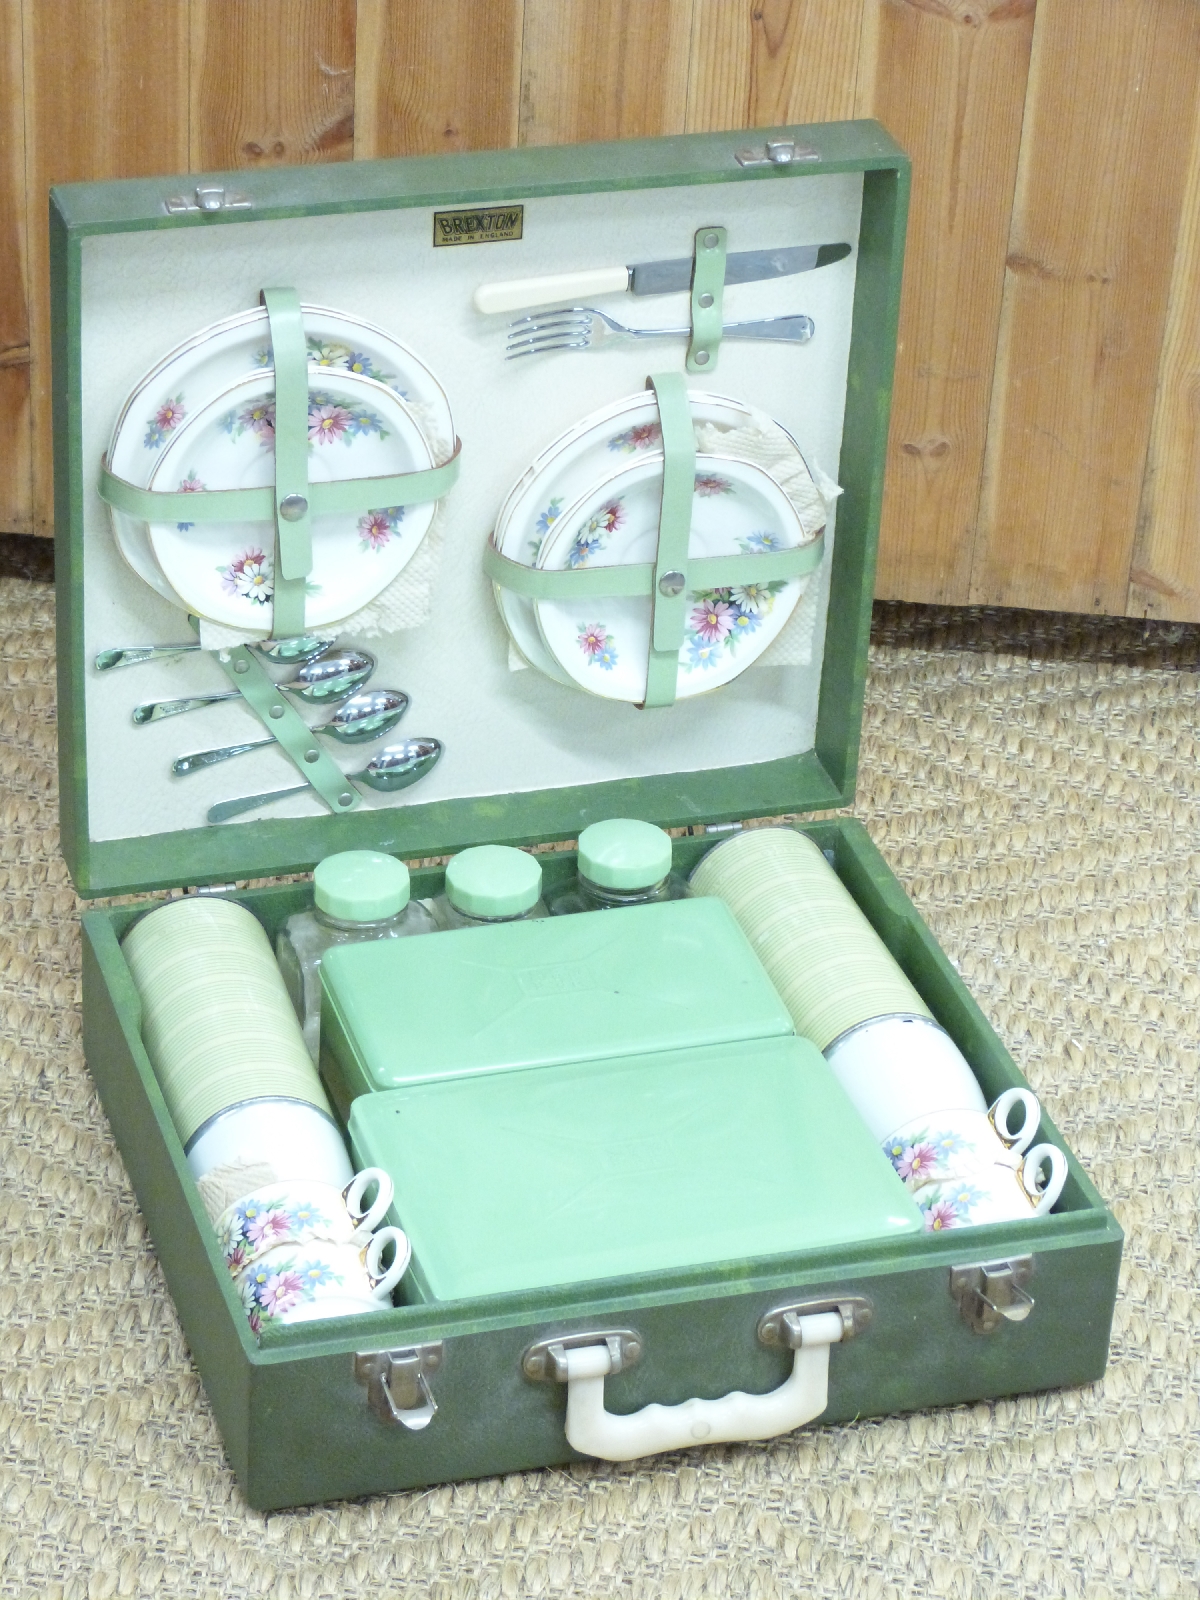 Brexton green retro picnic set with floral decoration to plates - Image 2 of 3